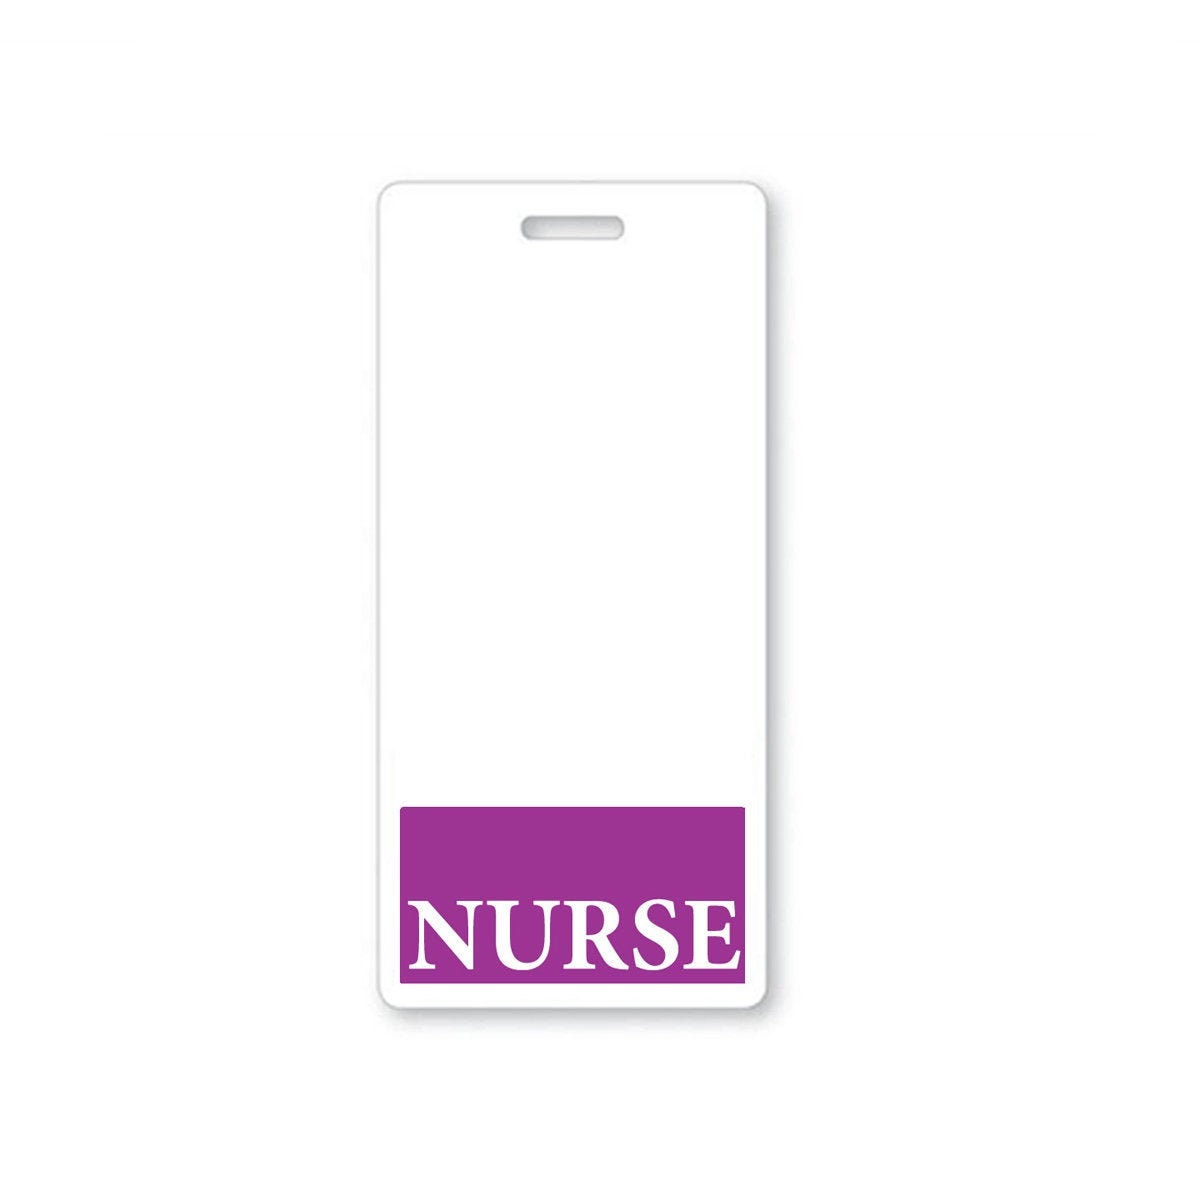 RN Badge Buddy - Purple with Medical Icons - Vertical Badge Id Card for  Registered Nurses - by BadgeZoo